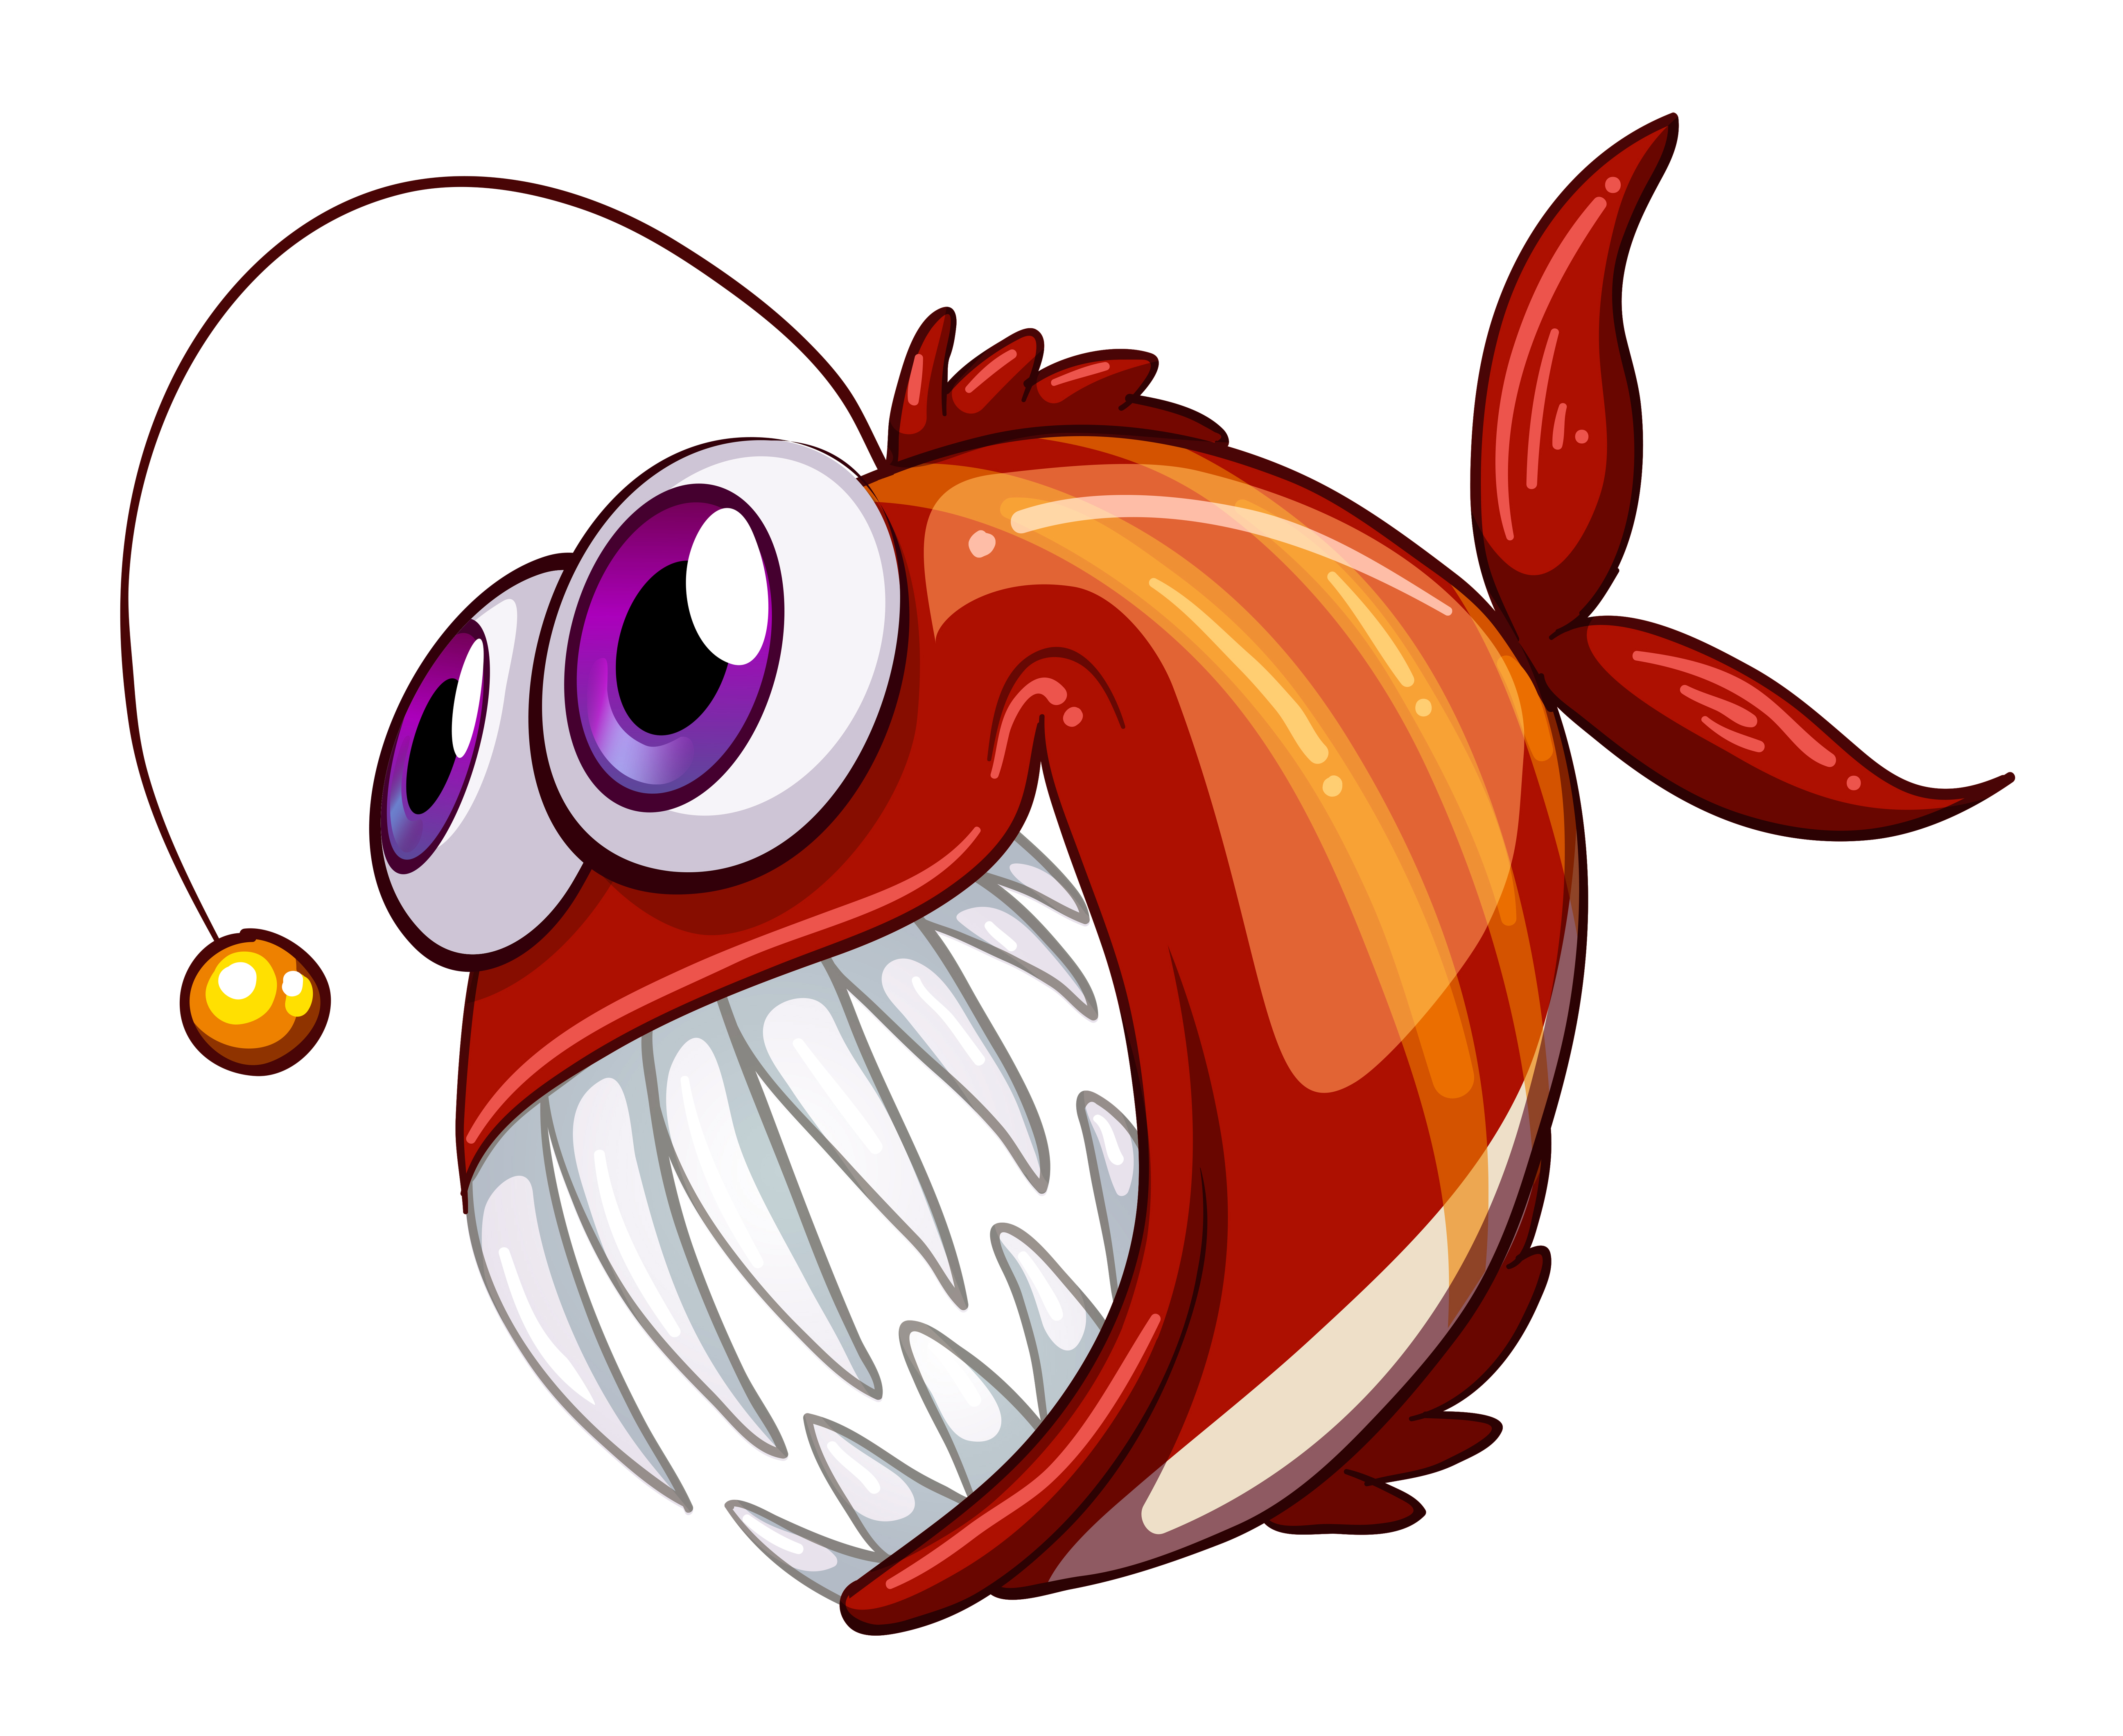 Download An ugly angry fish - Download Free Vectors, Clipart ...